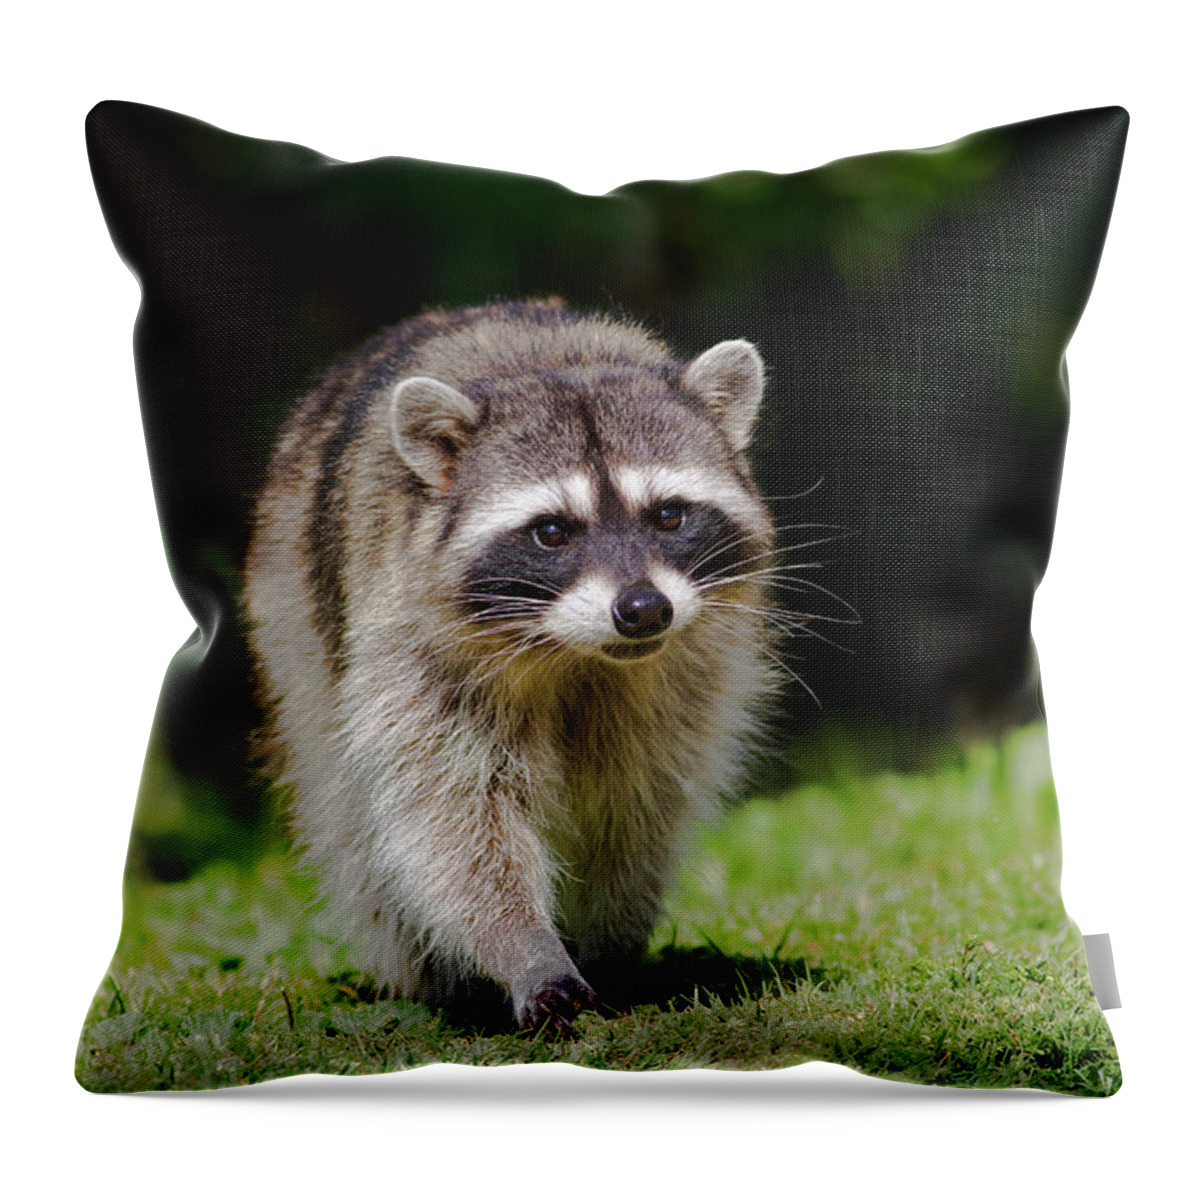 Raccoon Throw Pillow featuring the photograph Racoon Approach by Mark Miller